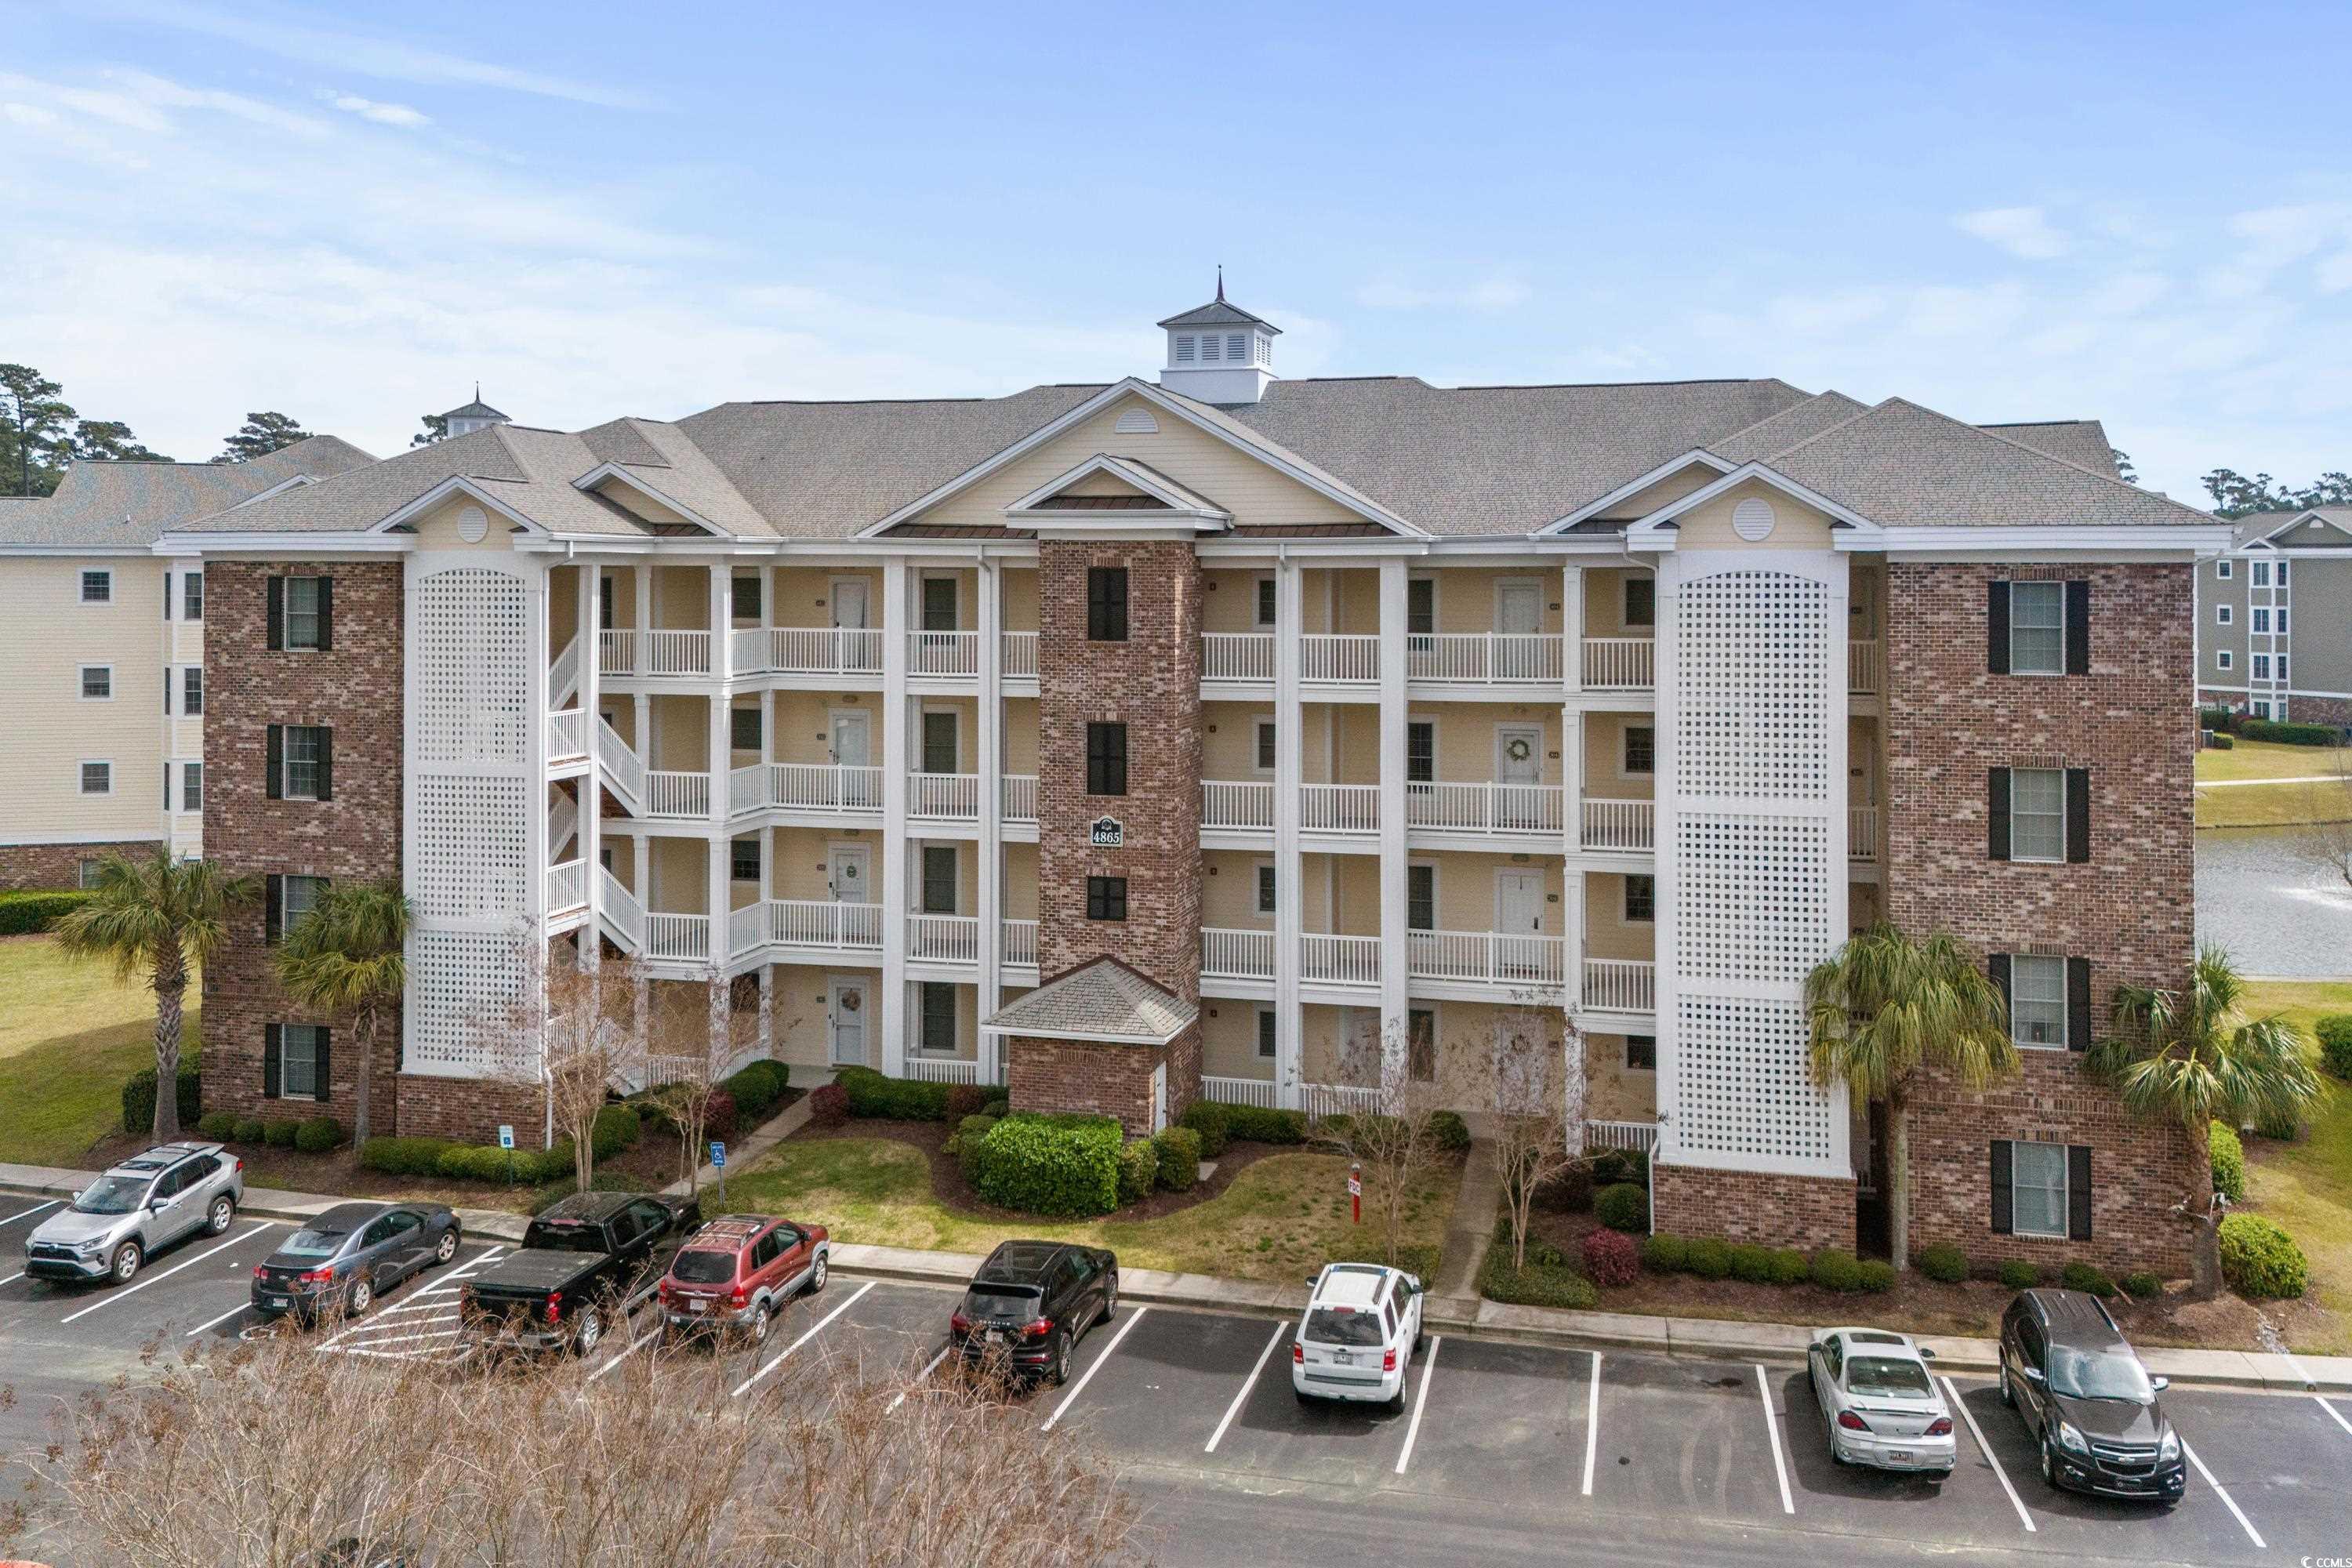 this 2 bed 2 bath well maintained golf villa provides you the comfort and luxury you and your guests deserve after a day at the beach walking the boardwalk or an enjoyable day on the golf course. located within minutes of everything you come to enjoy in myrtle beach! this condo has been recently updated with new luxury vinyl plank (lvp) flooring, fresh coat of paint, new microwave and a new water heater (required to be replaced every 10 years by the hoa keep in mind when looking at other units). it also comes fully furnished so you can have your toes in the sand or a tee time booked right after your closing, no moving trucks needed!  enjoy your morning coffee on your sun drenched 3rd floor balcony over looking a large pond with a fountain. the balcony has the popular e-z breeze enclosure system.  you can either slide the window panels up or down to allow the gentle beach breeze blow through or keep all the panels closed and stay dry on those rare rainy days.  don't miss your chance to own a piece of paradise in the most popular and growing area in the country! schedule your showing today and start living the coastal lifestyle you've always dreamed of!